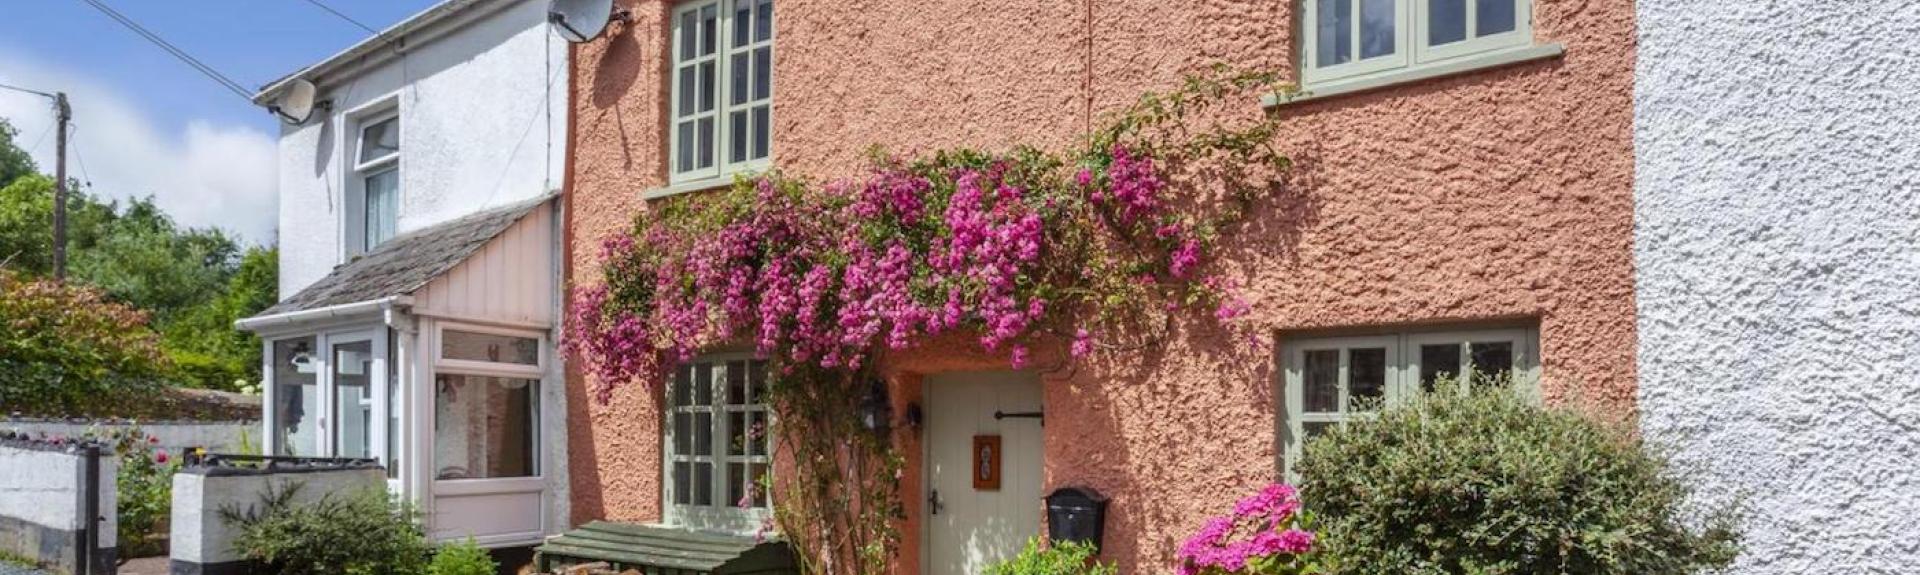 A double fronted terraaced cottage with a flower-clad creeper hanging above its front door.